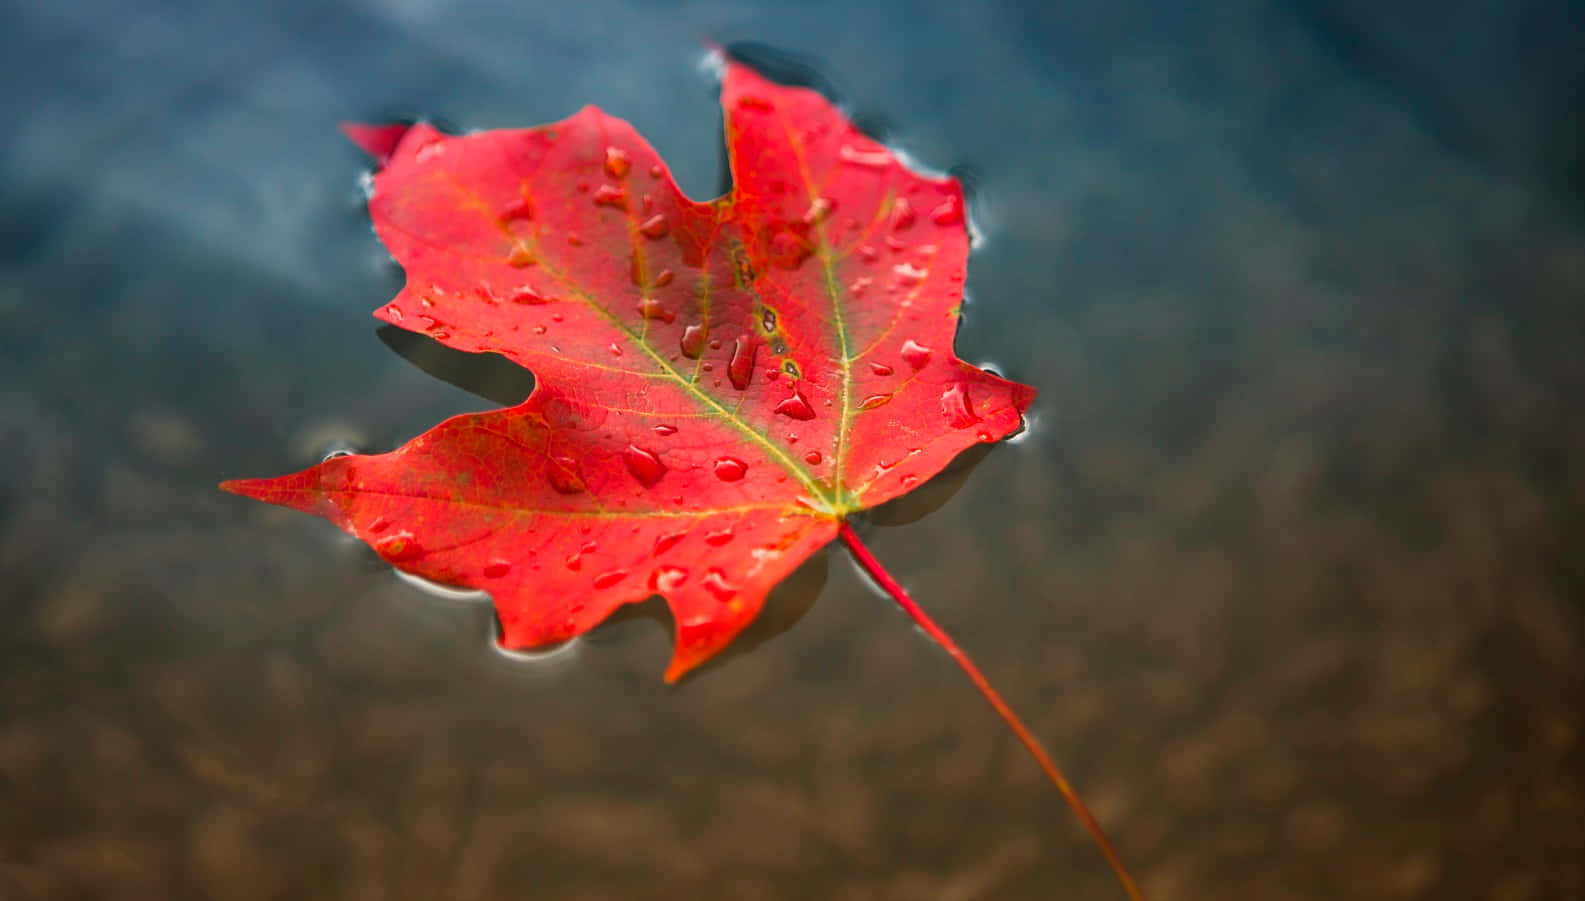 Burst of Warmth from a Canadian Maple Leaf